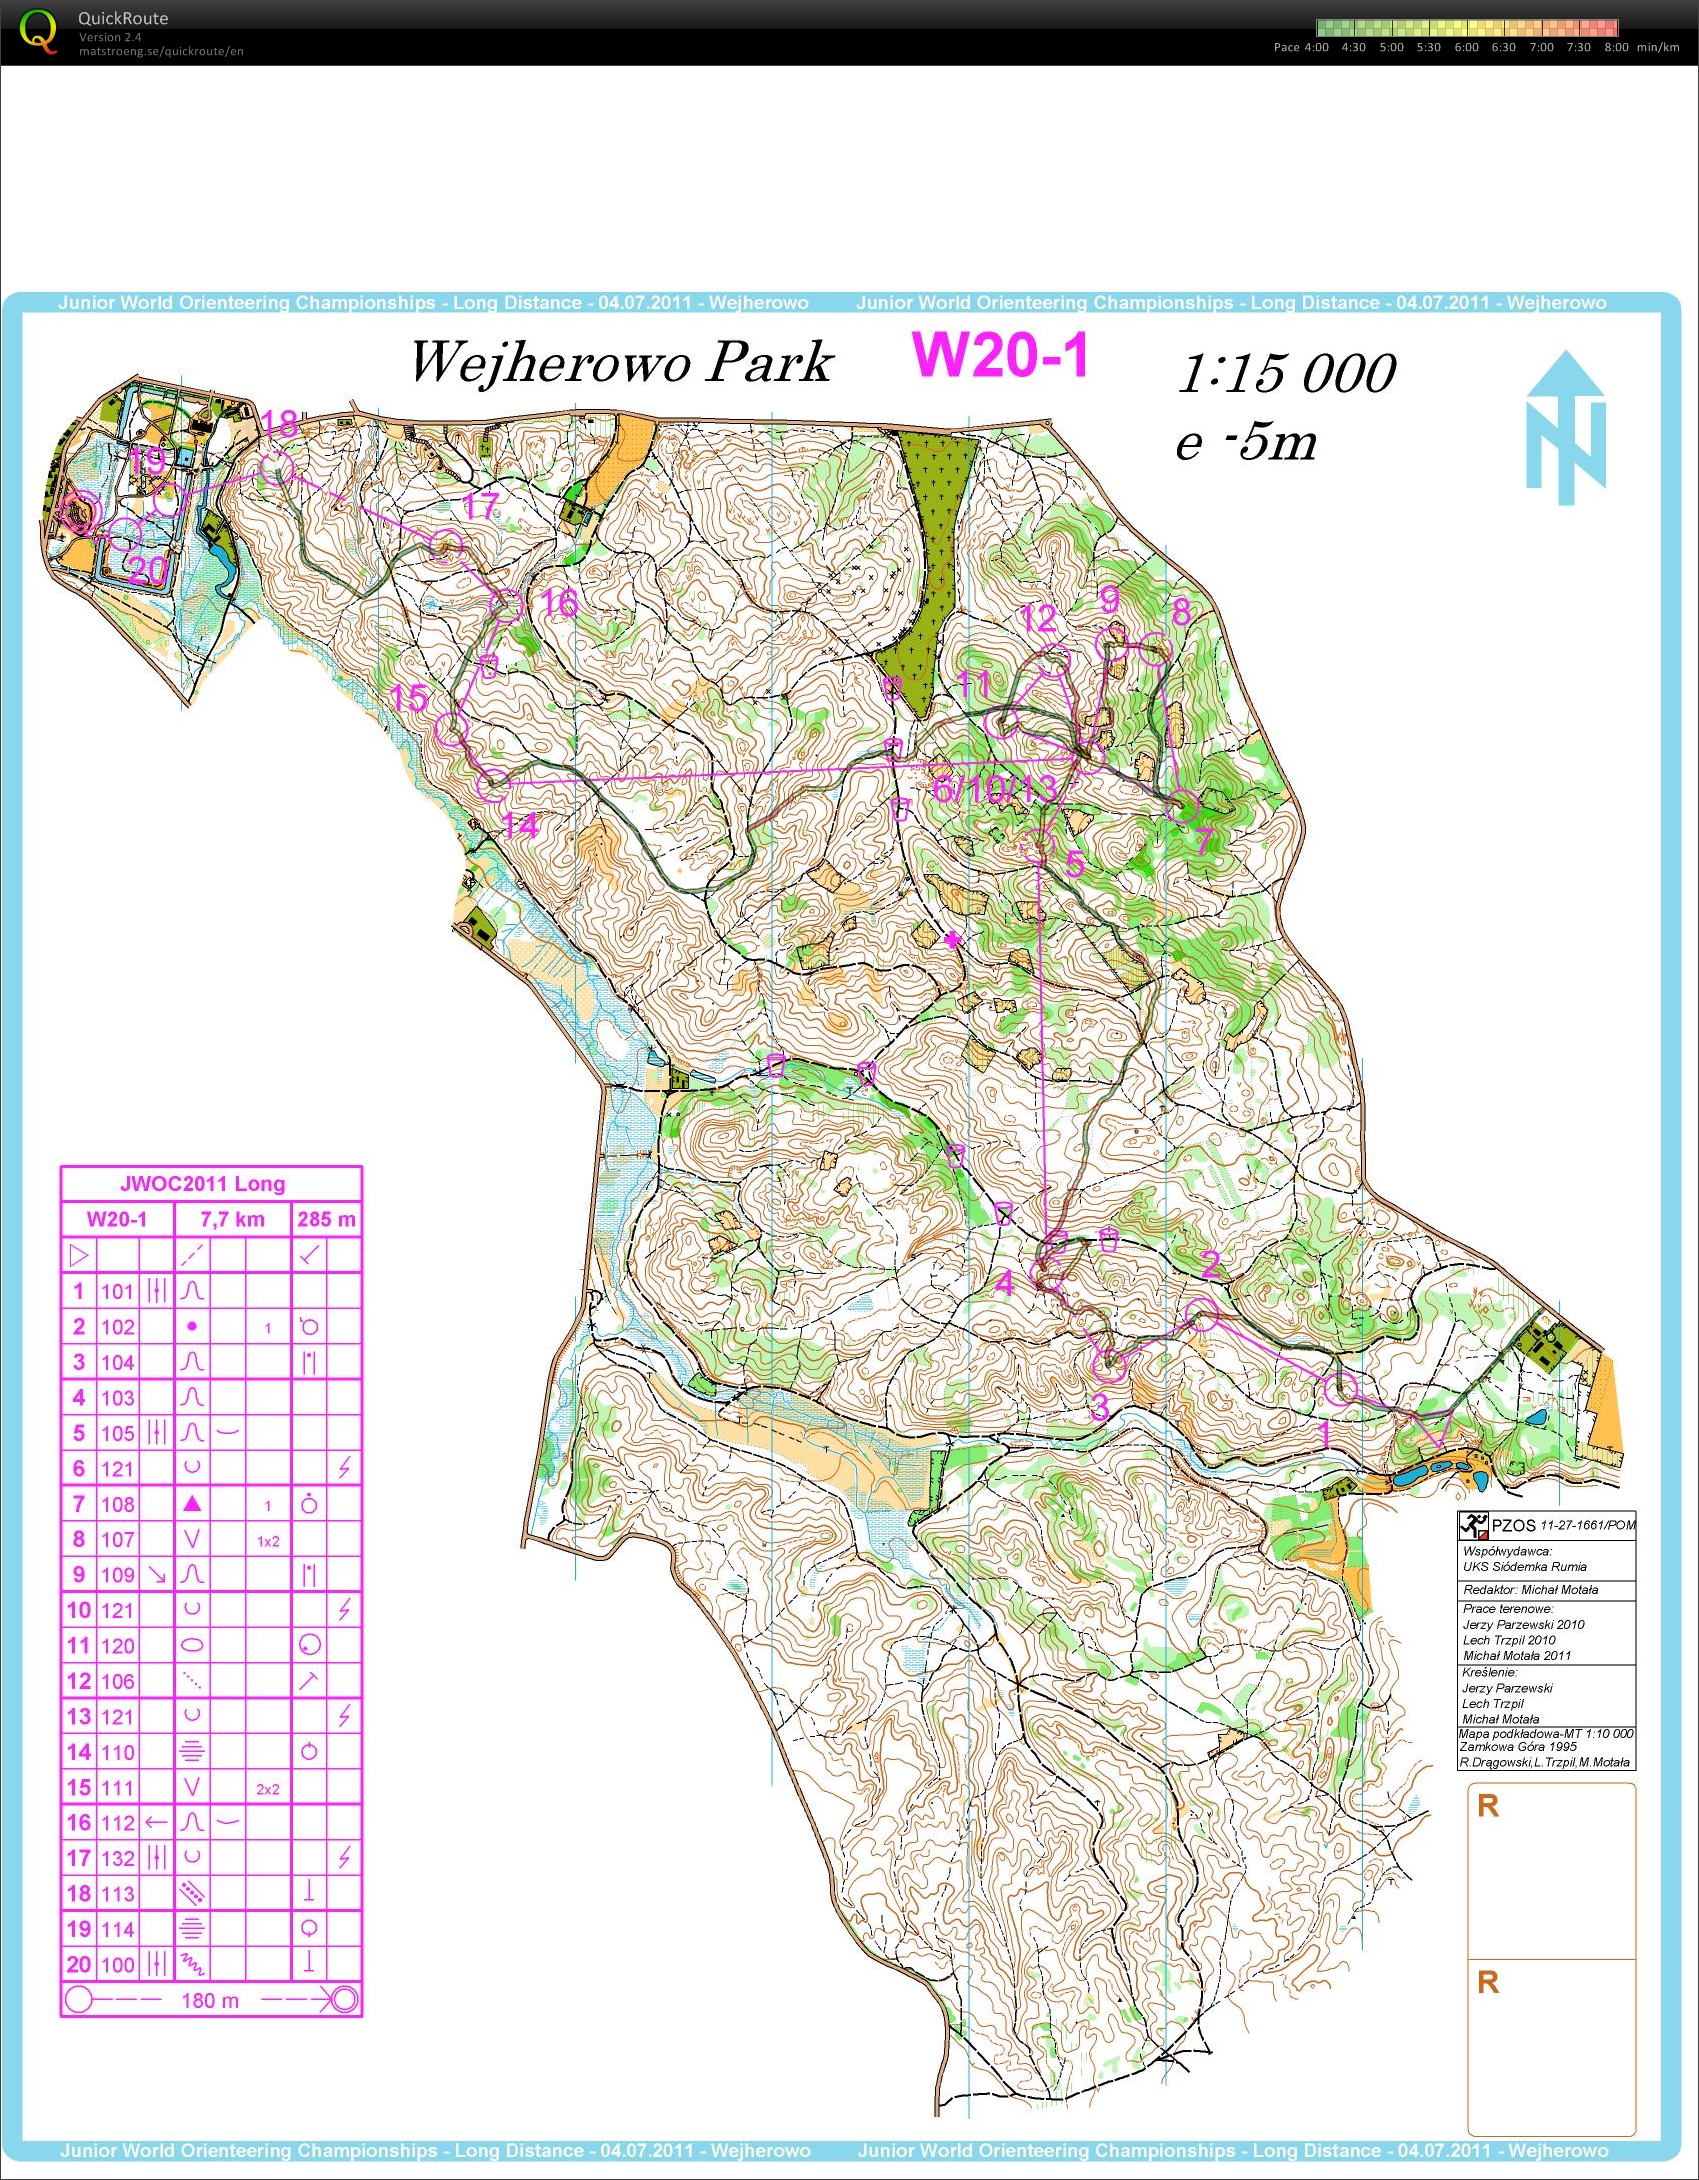 MP camp, long W20 from JWOC 2011 (13/09/2014)